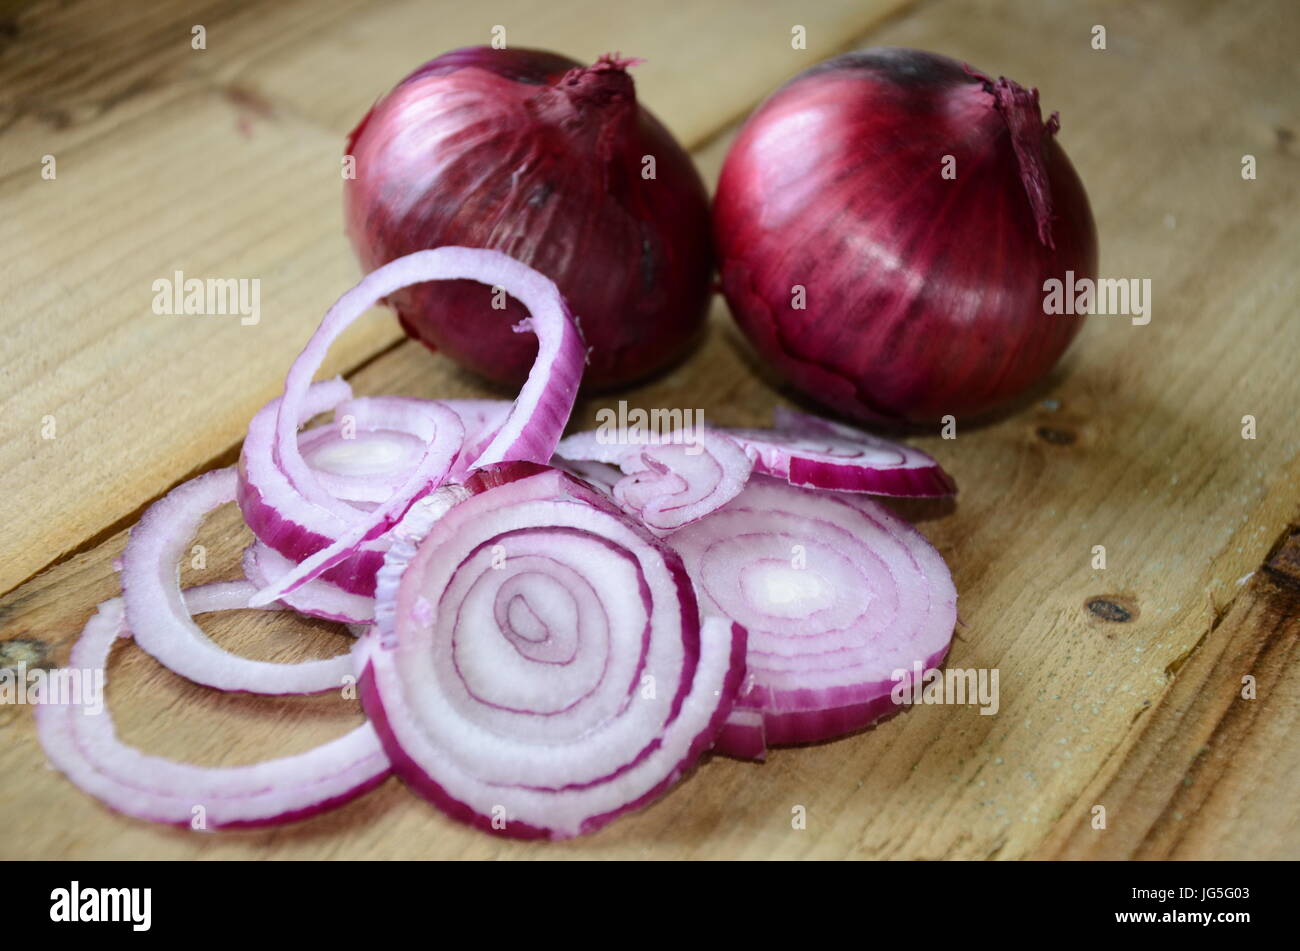 onions great cooking ingredients Stock Photo